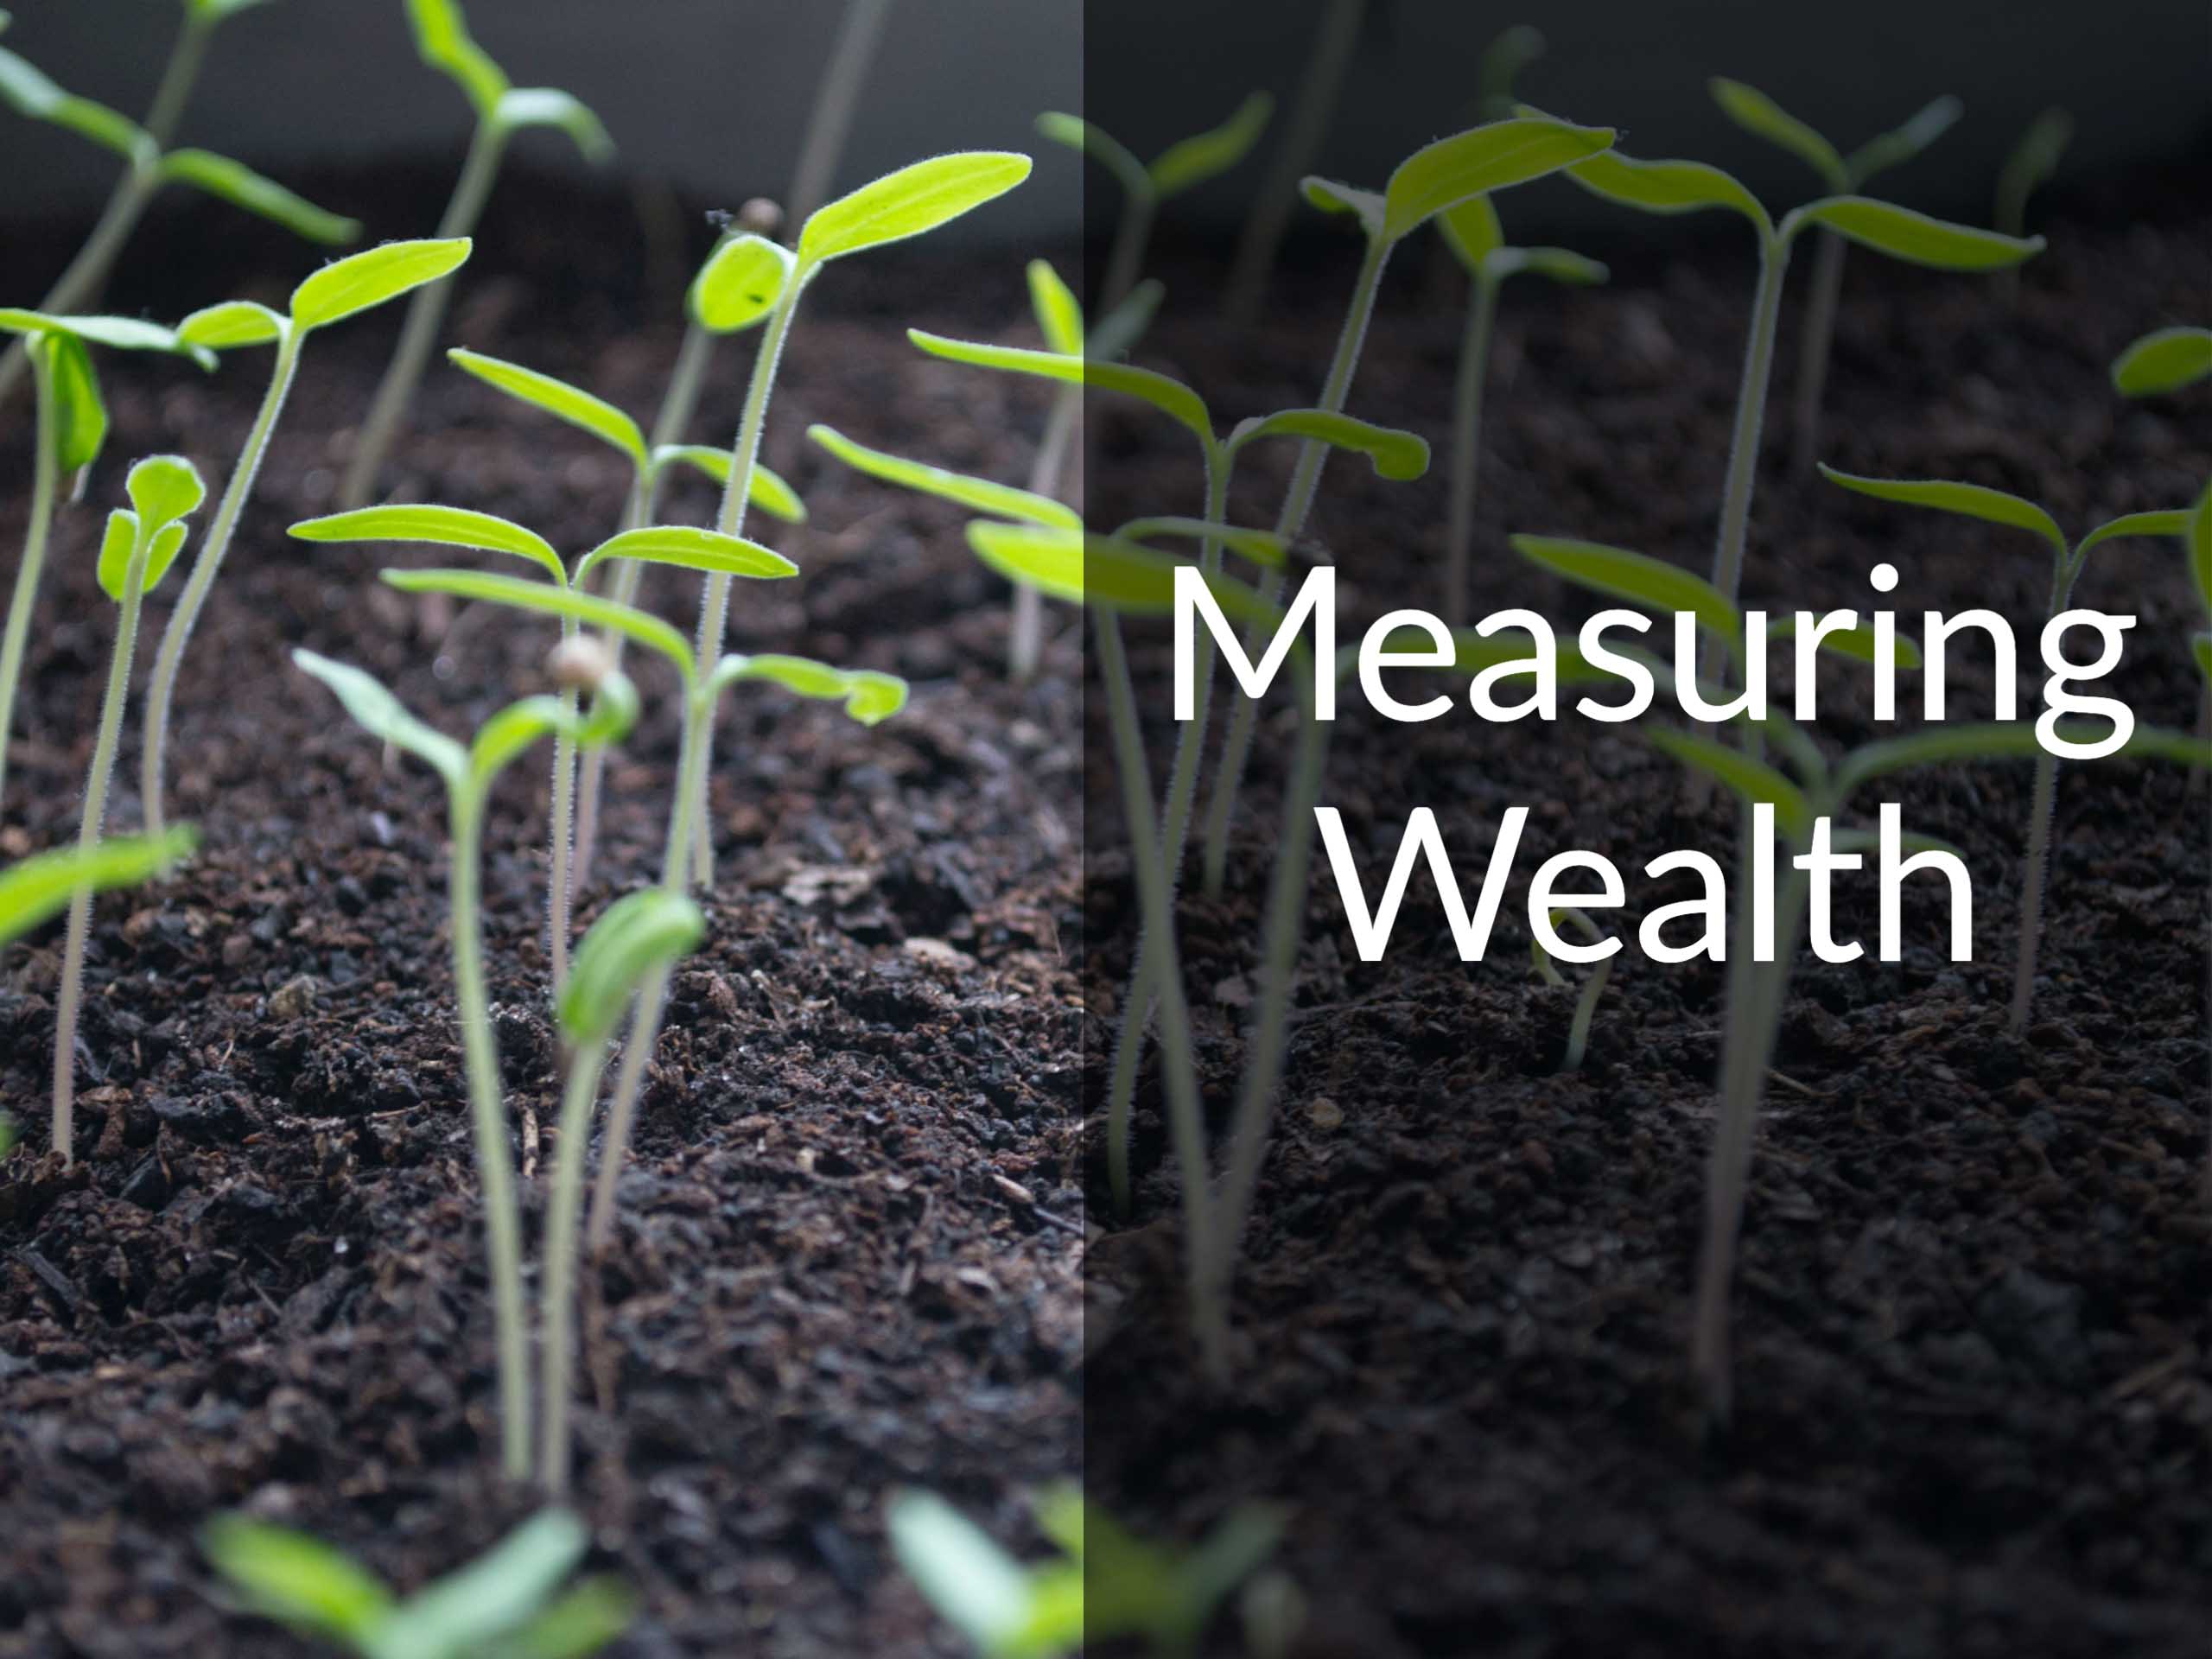 430: How Should Personal and National Wealth Be Measured?